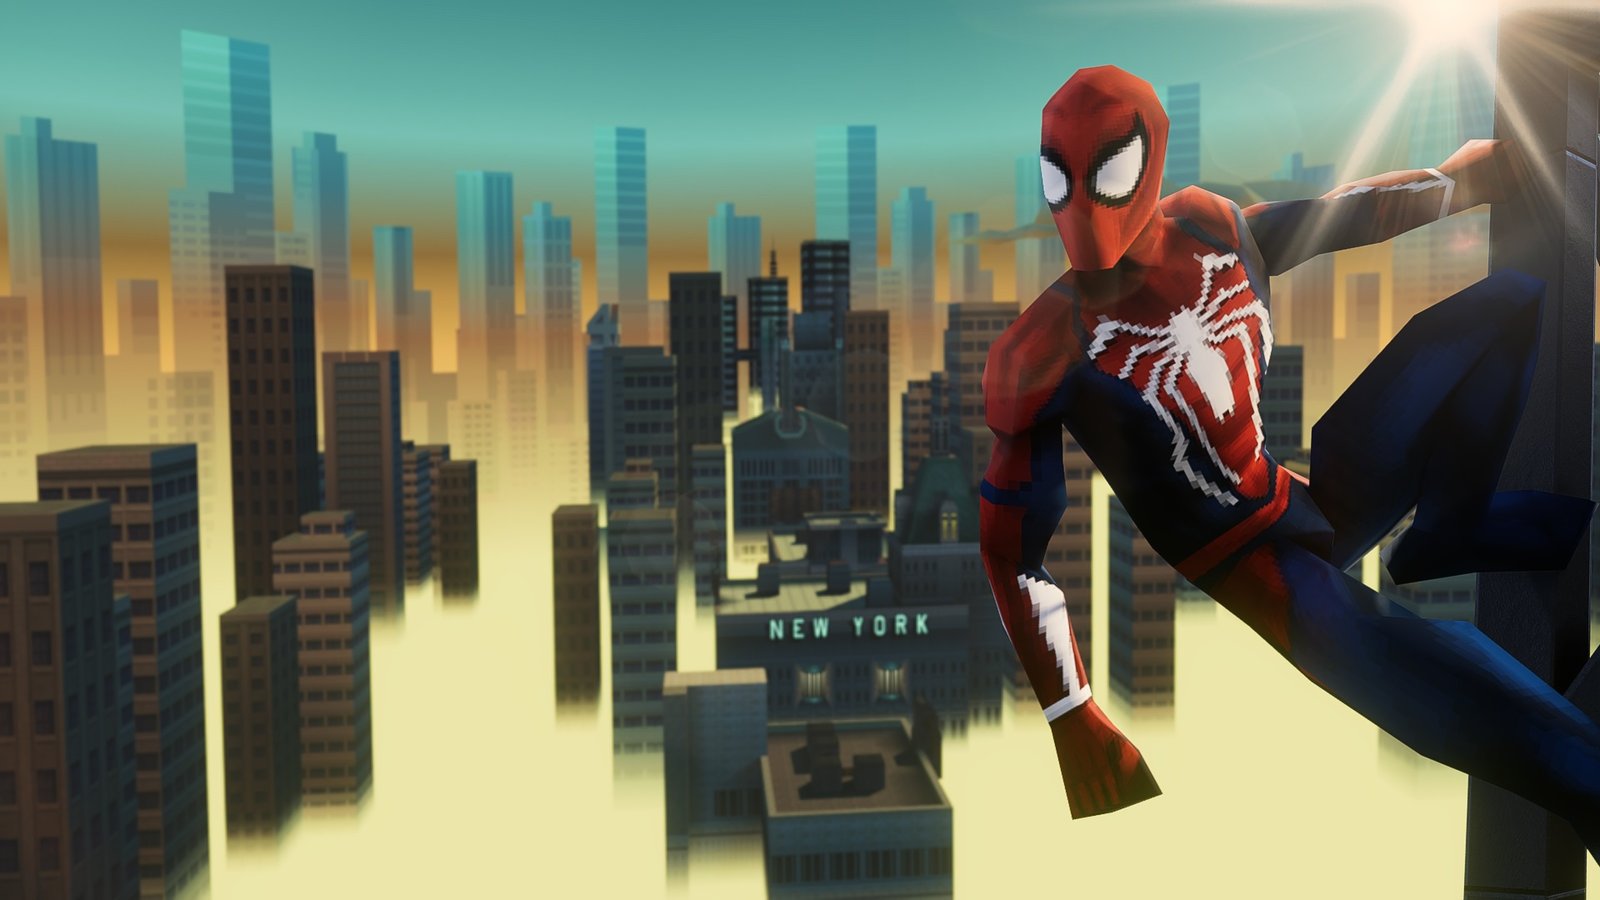 spiderman in low poly advanced suit clinging to side of building, new york awash in yellow gas visible in background